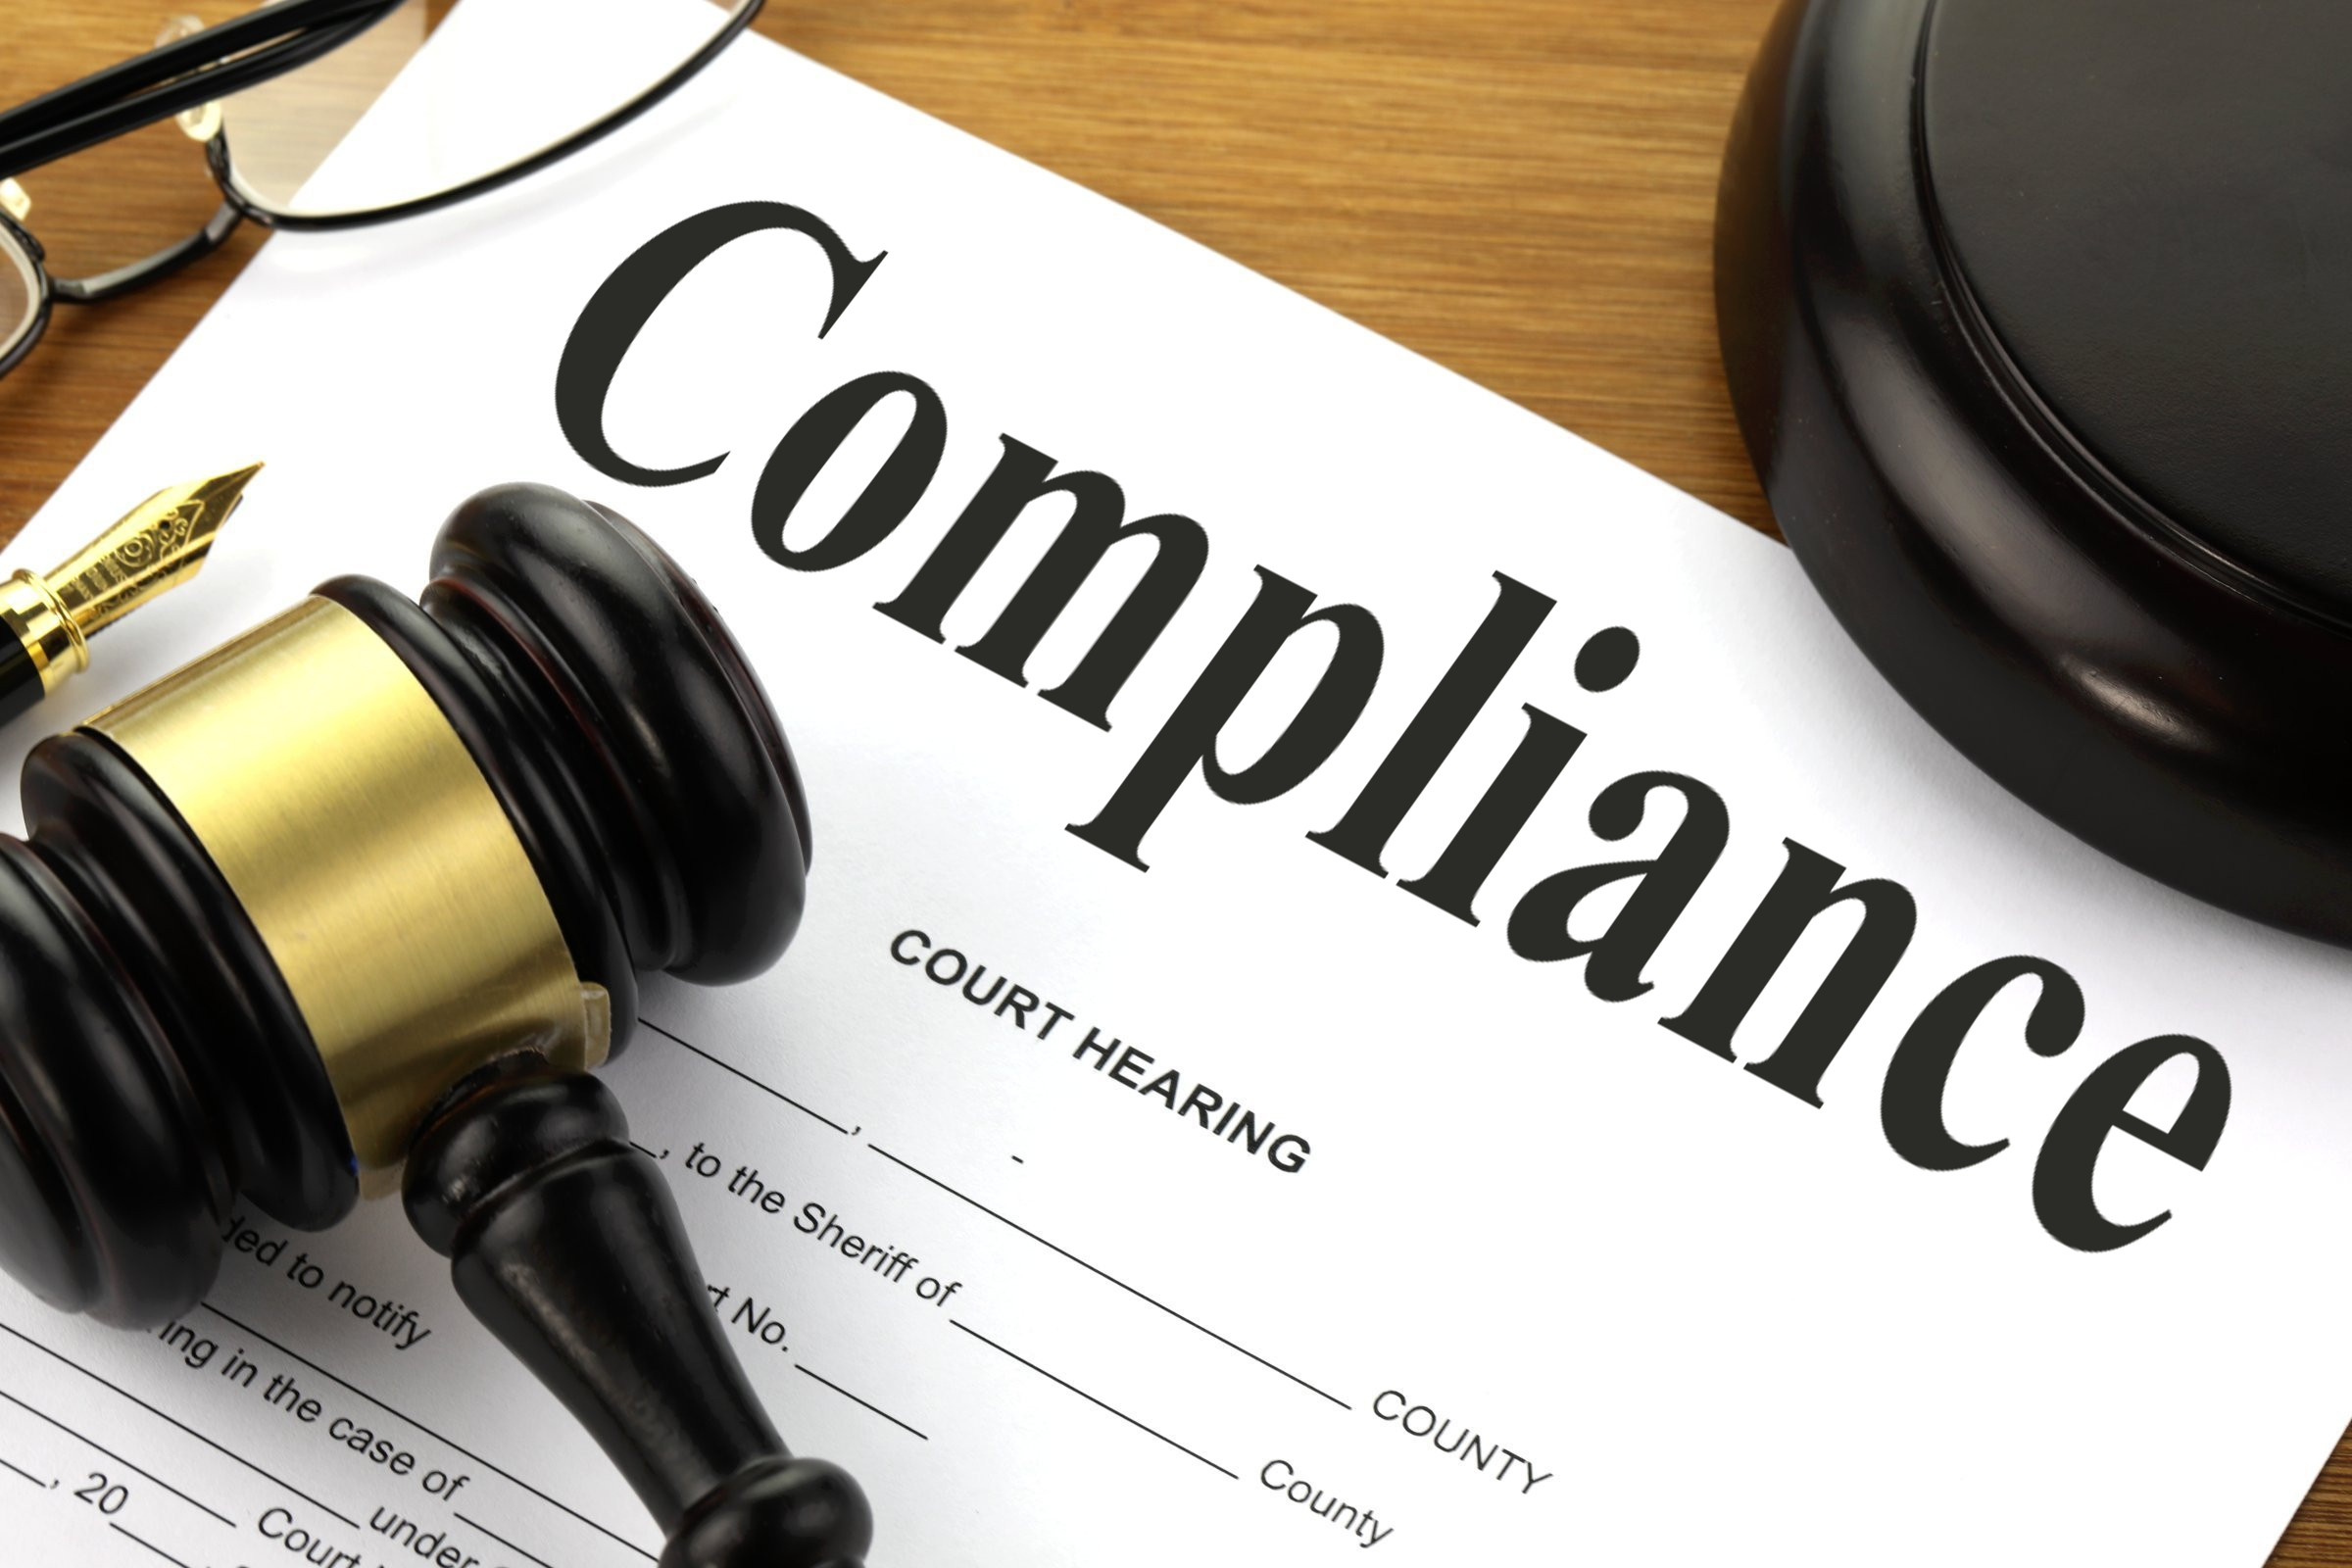 Compliance - Free of Charge Creative Commons Legal 1 image